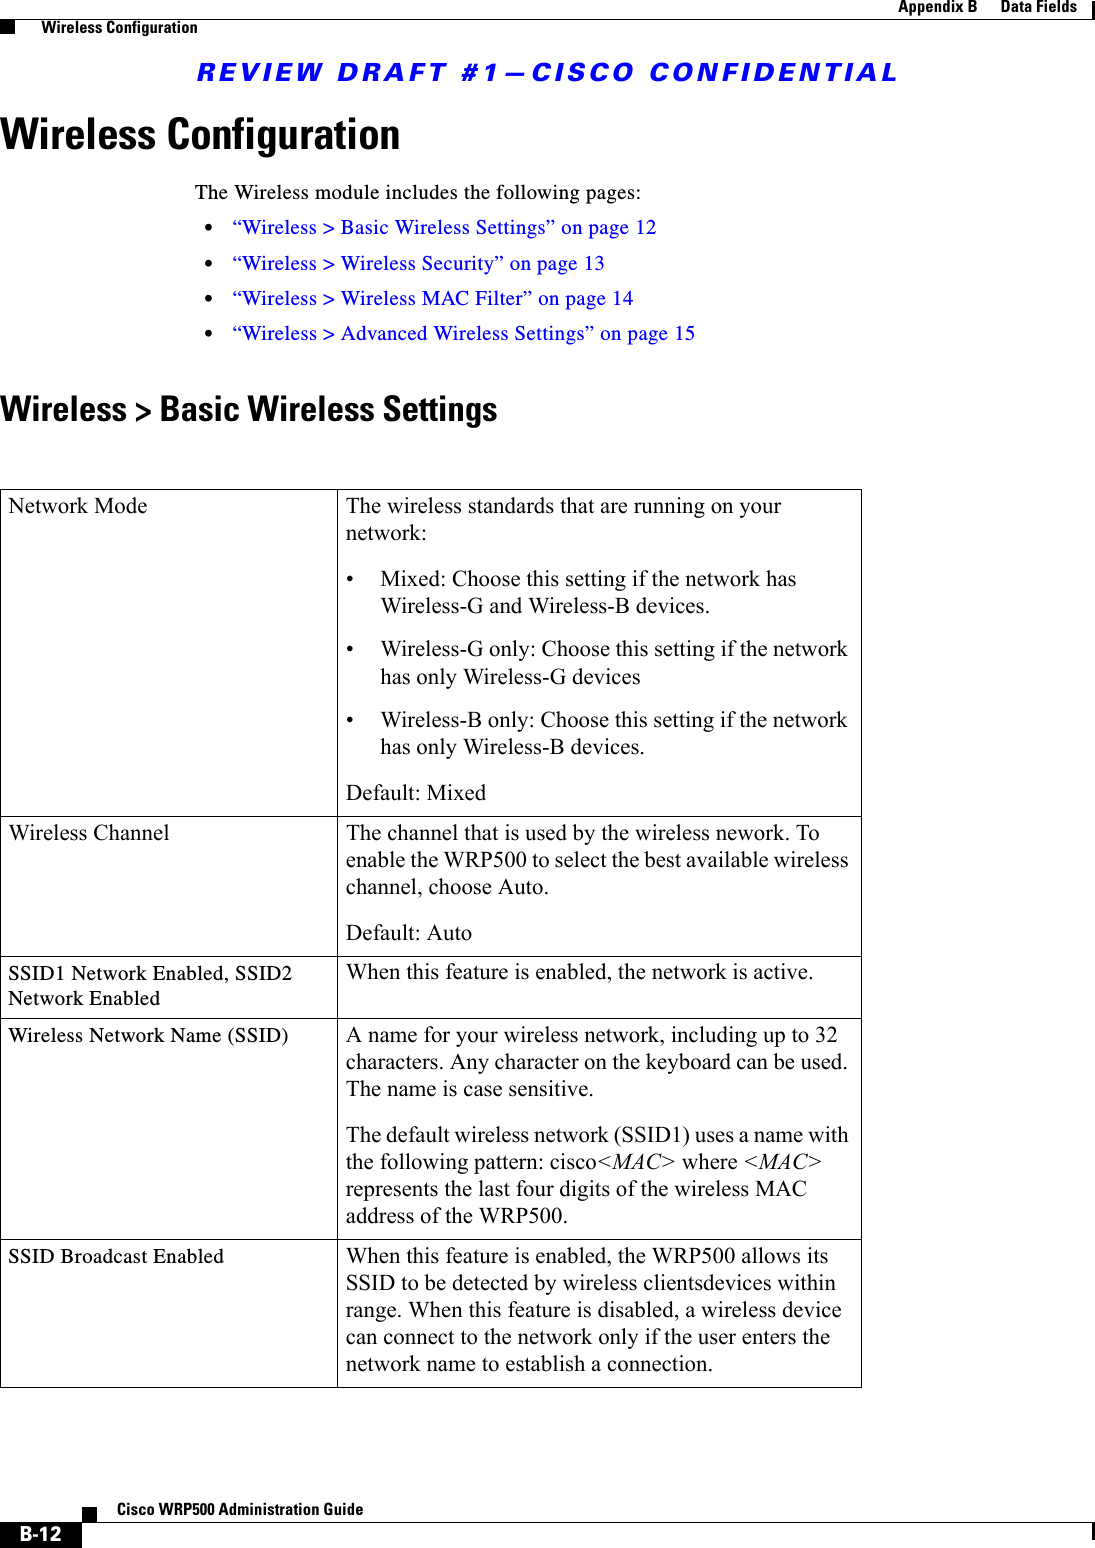 REVIEW DRAFT #1—CISCO CONFIDENTIALB-12Cisco WRP500 Administration Guide Appendix B      Data Fields  Wireless ConfigurationWireless ConfigurationThe Wireless module includes the following pages:•“Wireless &gt; Basic Wireless Settings” on page 12•“Wireless &gt; Wireless Security” on page 13•“Wireless &gt; Wireless MAC Filter” on page 14•“Wireless &gt; Advanced Wireless Settings” on page 15Wireless &gt; Basic Wireless SettingsNetwork Mode The wireless standards that are running on your network:• Mixed: Choose this setting if the network has Wireless-G and Wireless-B devices.• Wireless-G only: Choose this setting if the network has only Wireless-G devices• Wireless-B only: Choose this setting if the network has only Wireless-B devices.Default: MixedWireless Channel The channel that is used by the wireless nework. To enable the WRP500 to select the best available wireless channel, choose Auto.Default: AutoSSID1 Network Enabled, SSID2 Network EnabledWhen this feature is enabled, the network is active.Wireless Network Name (SSID) A name for your wireless network, including up to 32 characters. Any character on the keyboard can be used. The name is case sensitive.The default wireless network (SSID1) uses a name with the following pattern: cisco&lt;MAC&gt; where &lt;MAC&gt; represents the last four digits of the wireless MAC address of the WRP500. SSID Broadcast Enabled When this feature is enabled, the WRP500 allows its SSID to be detected by wireless clientsdevices within range. When this feature is disabled, a wireless device can connect to the network only if the user enters the network name to establish a connection.